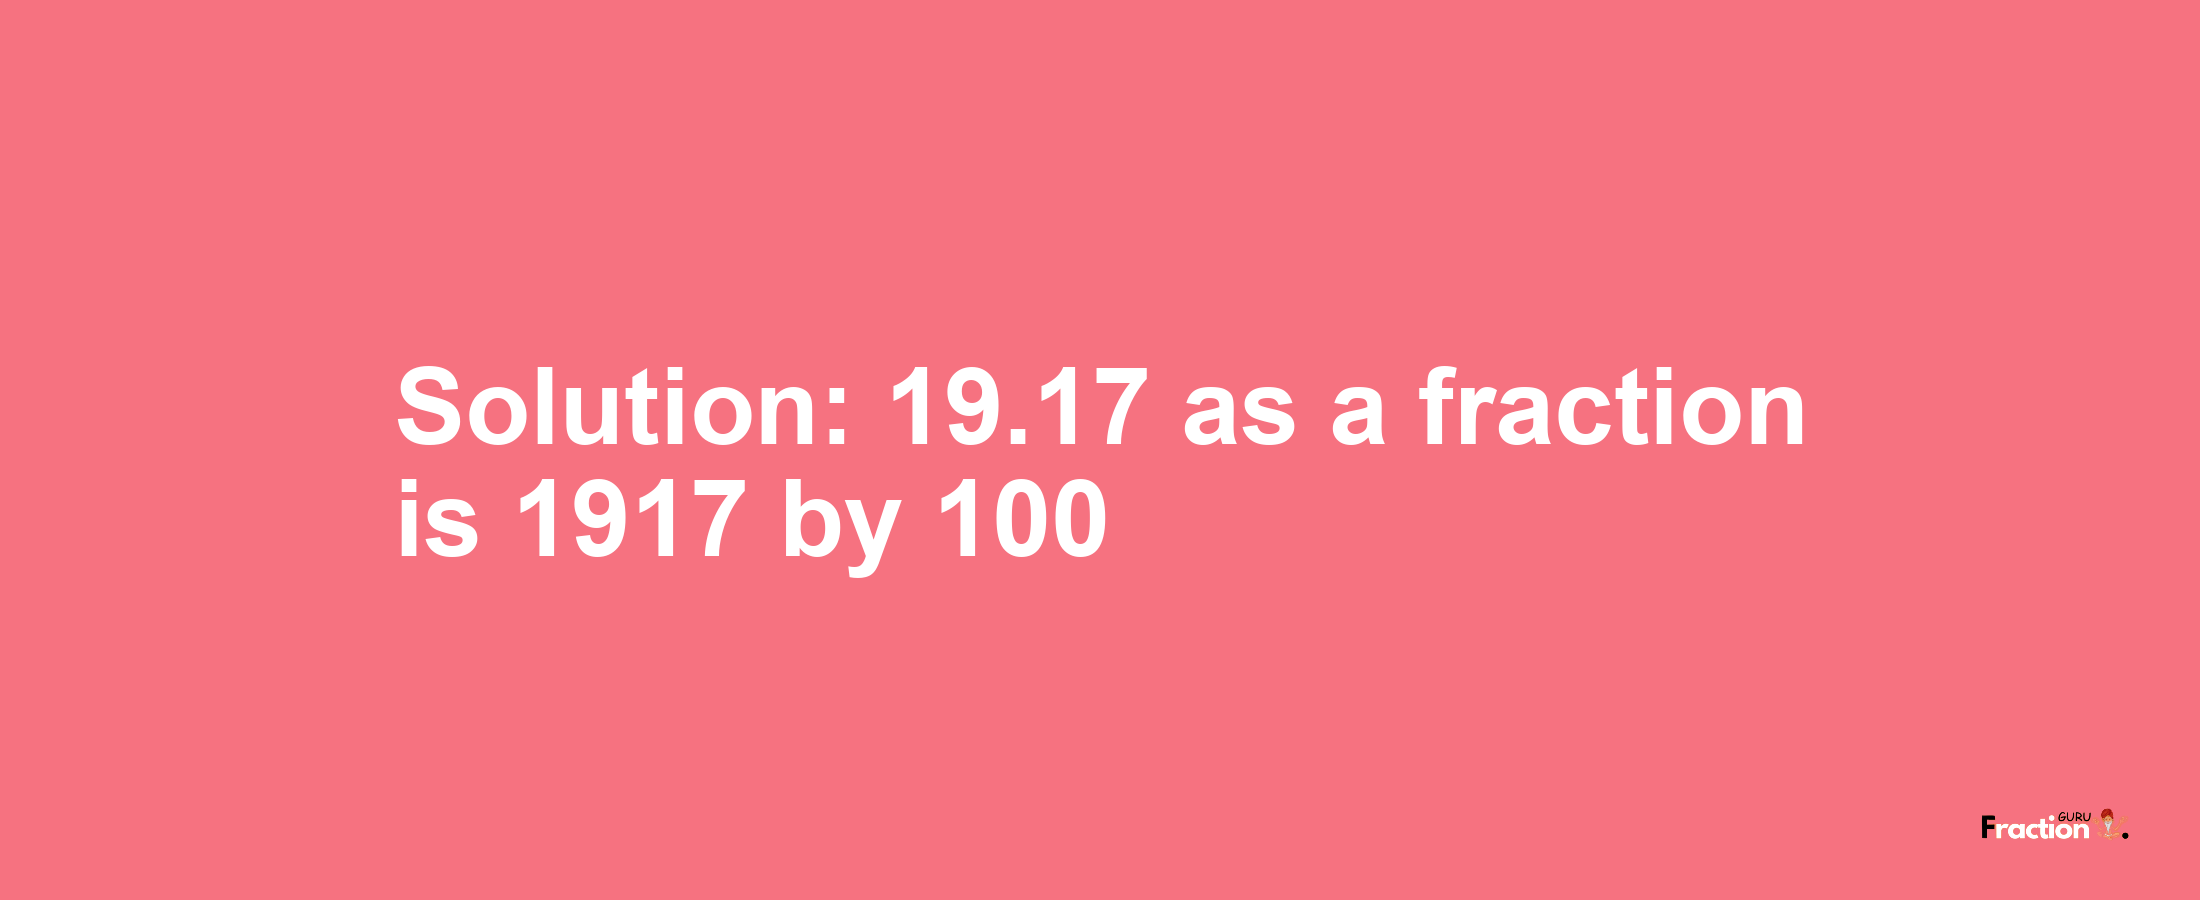 Solution:19.17 as a fraction is 1917/100